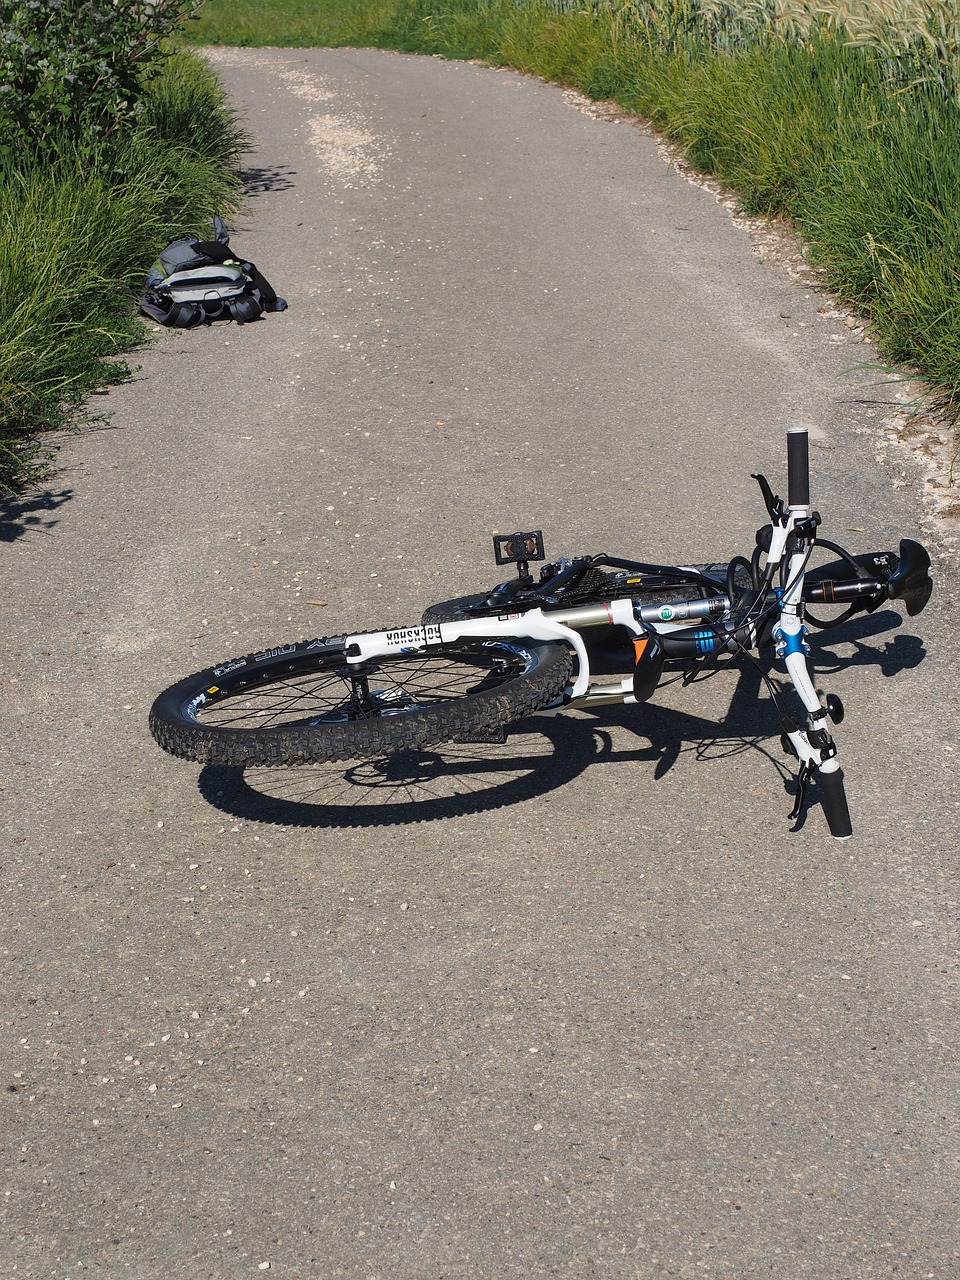 COMMON CAUSES OF BICYCLE ACCIDENTS IN TEXAS